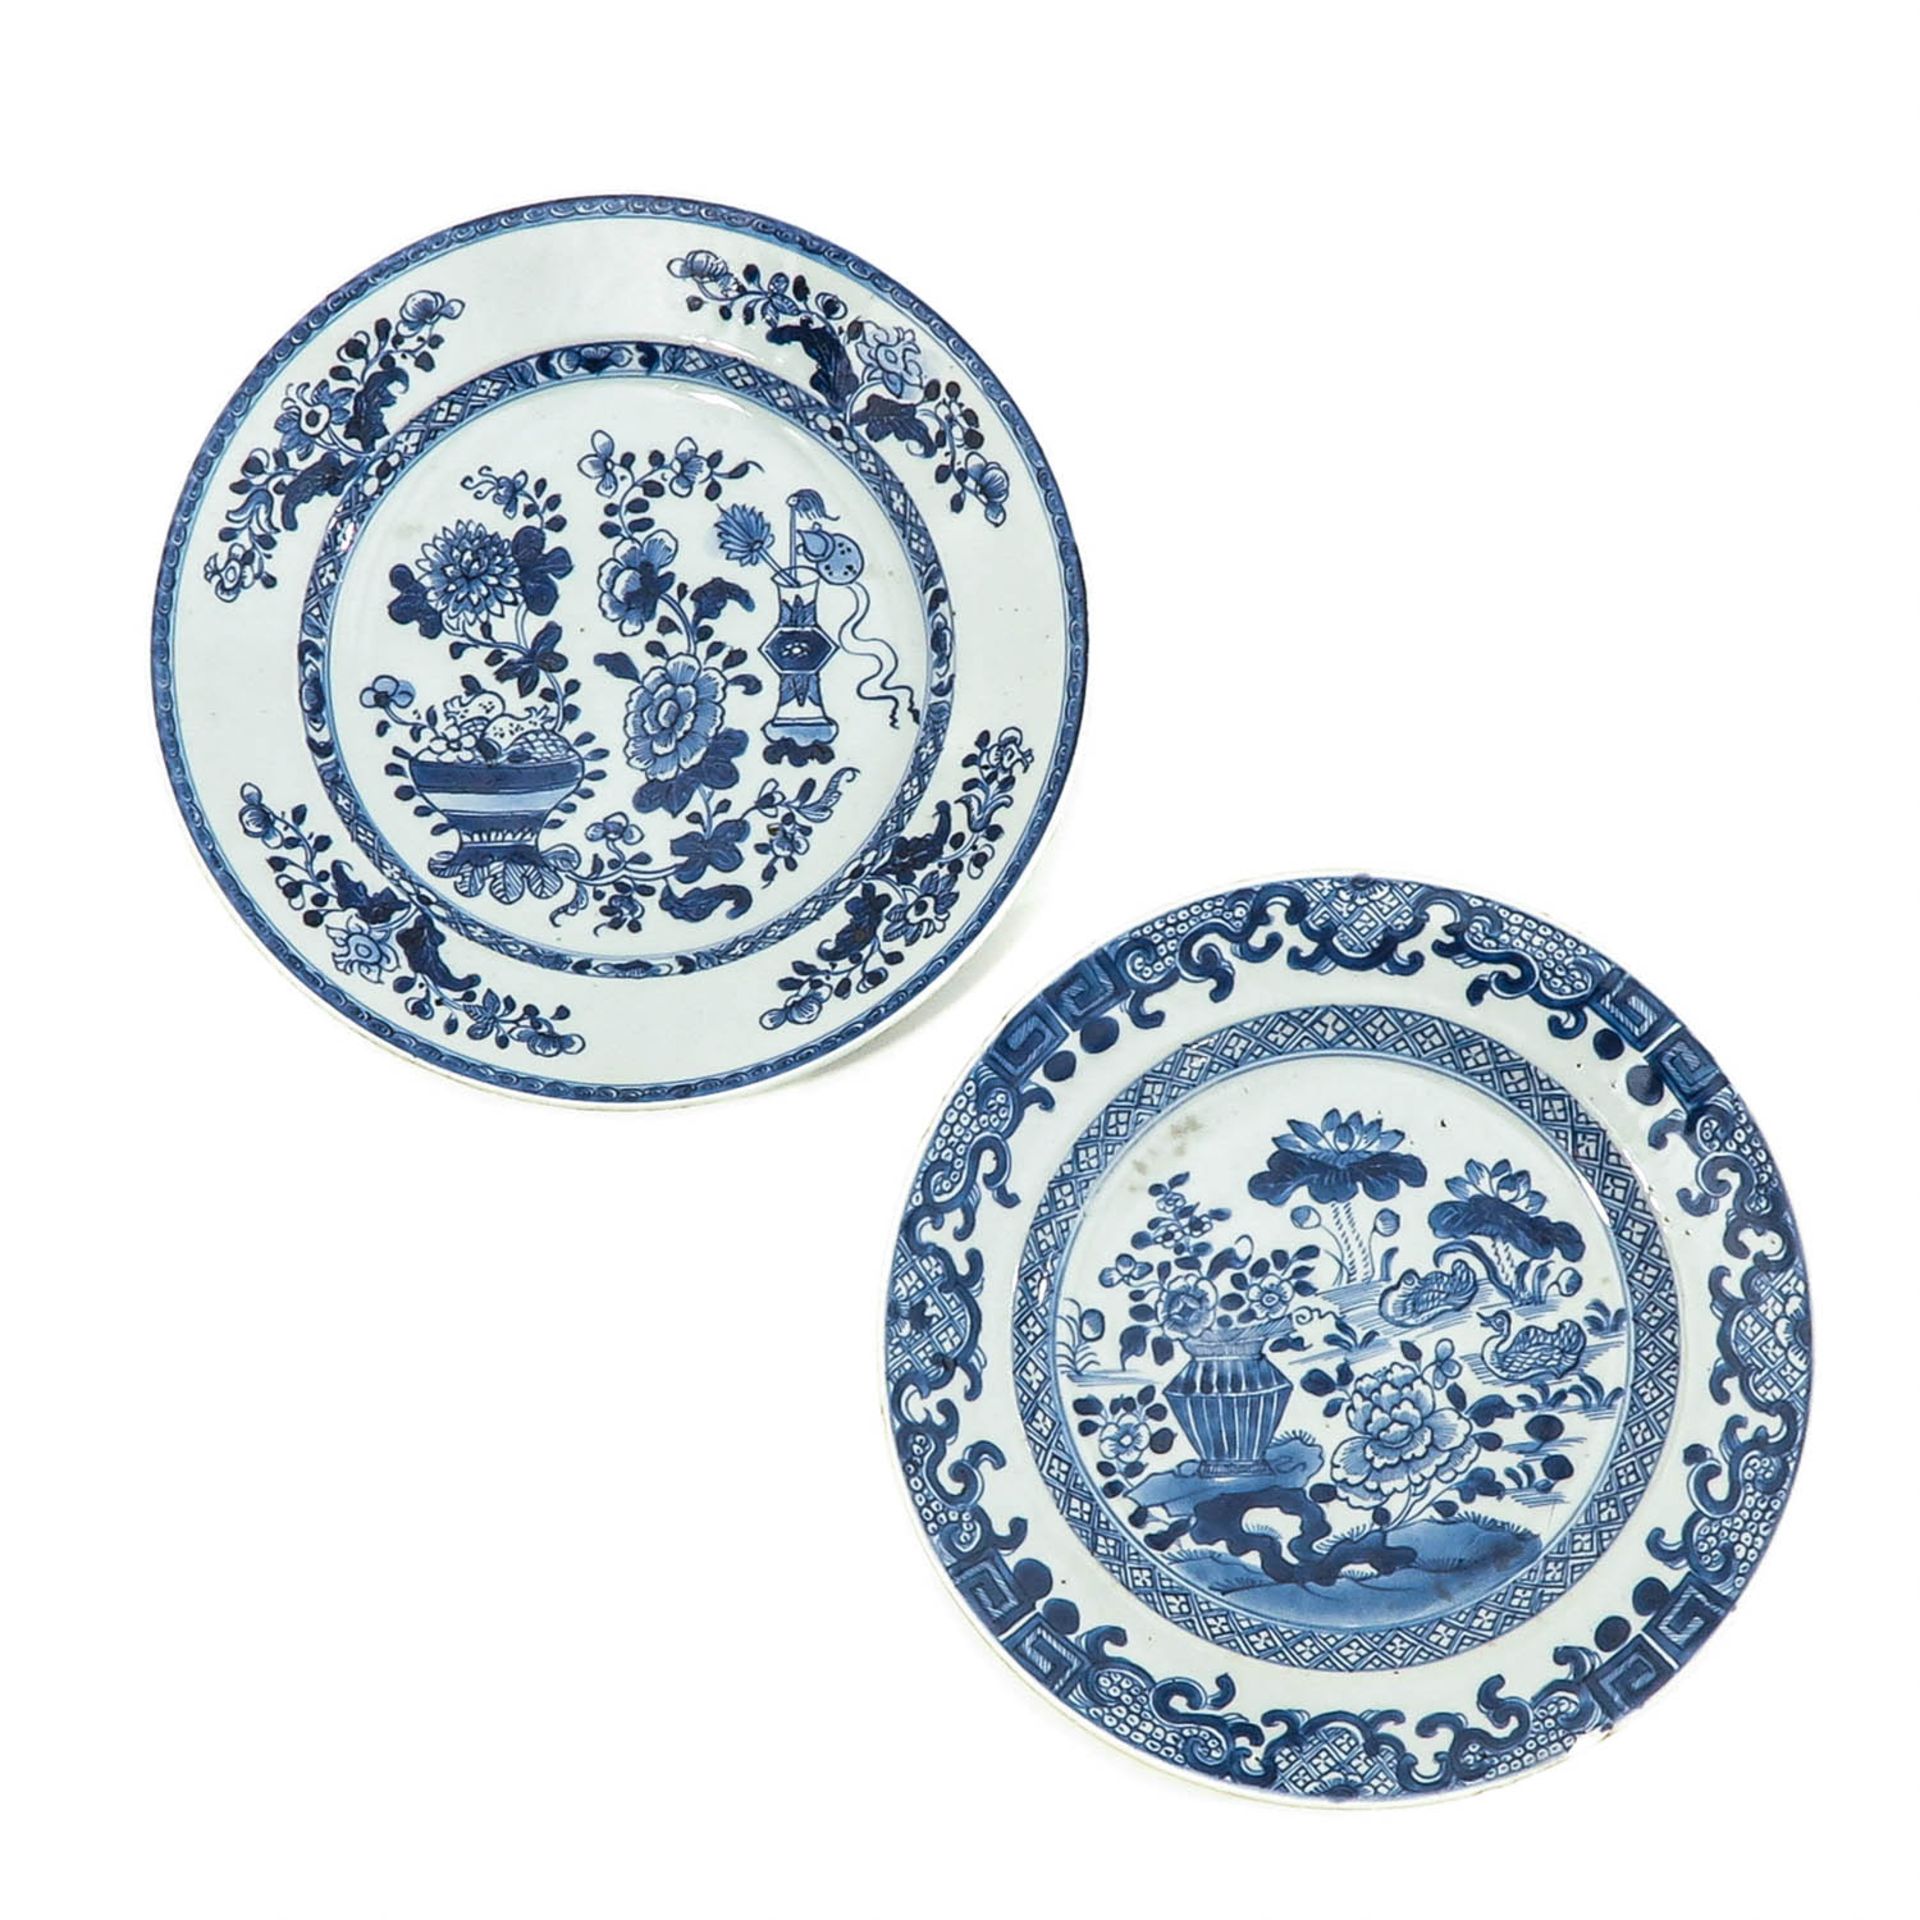 A Collection of 6 Blue and White Plates - Image 7 of 10